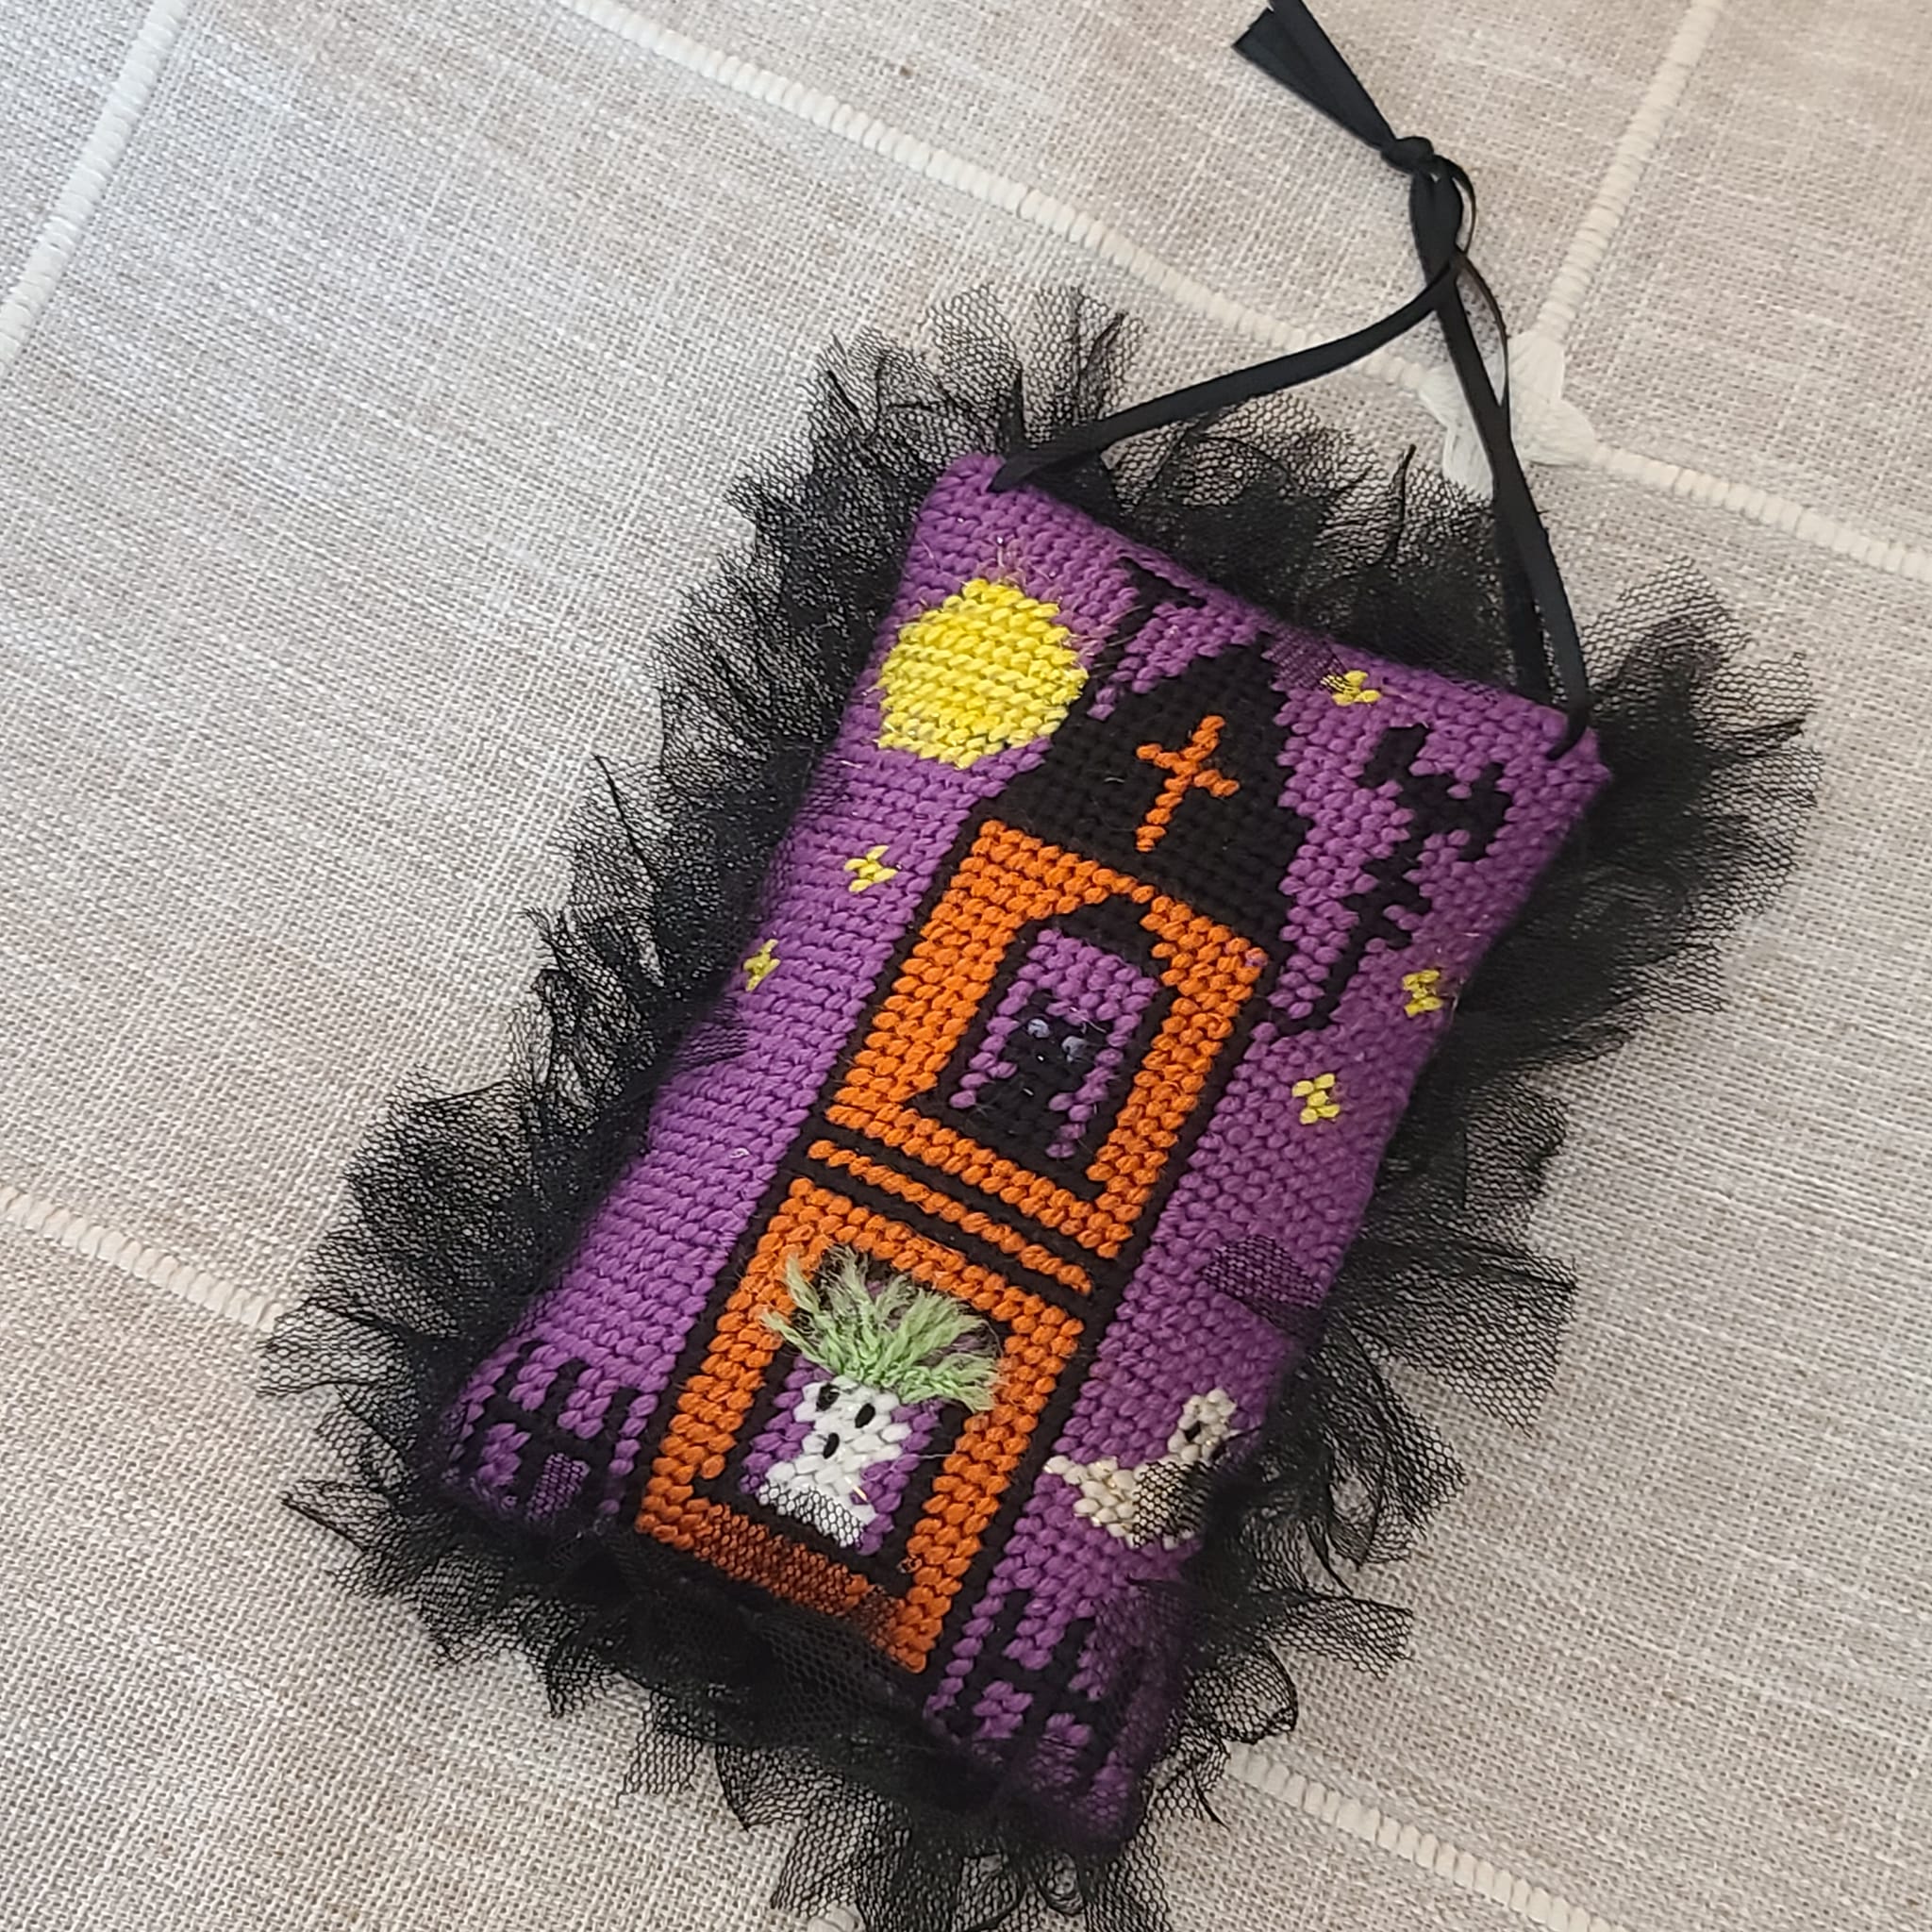 Halloween finished needlepoint Haunted House with tulle trim